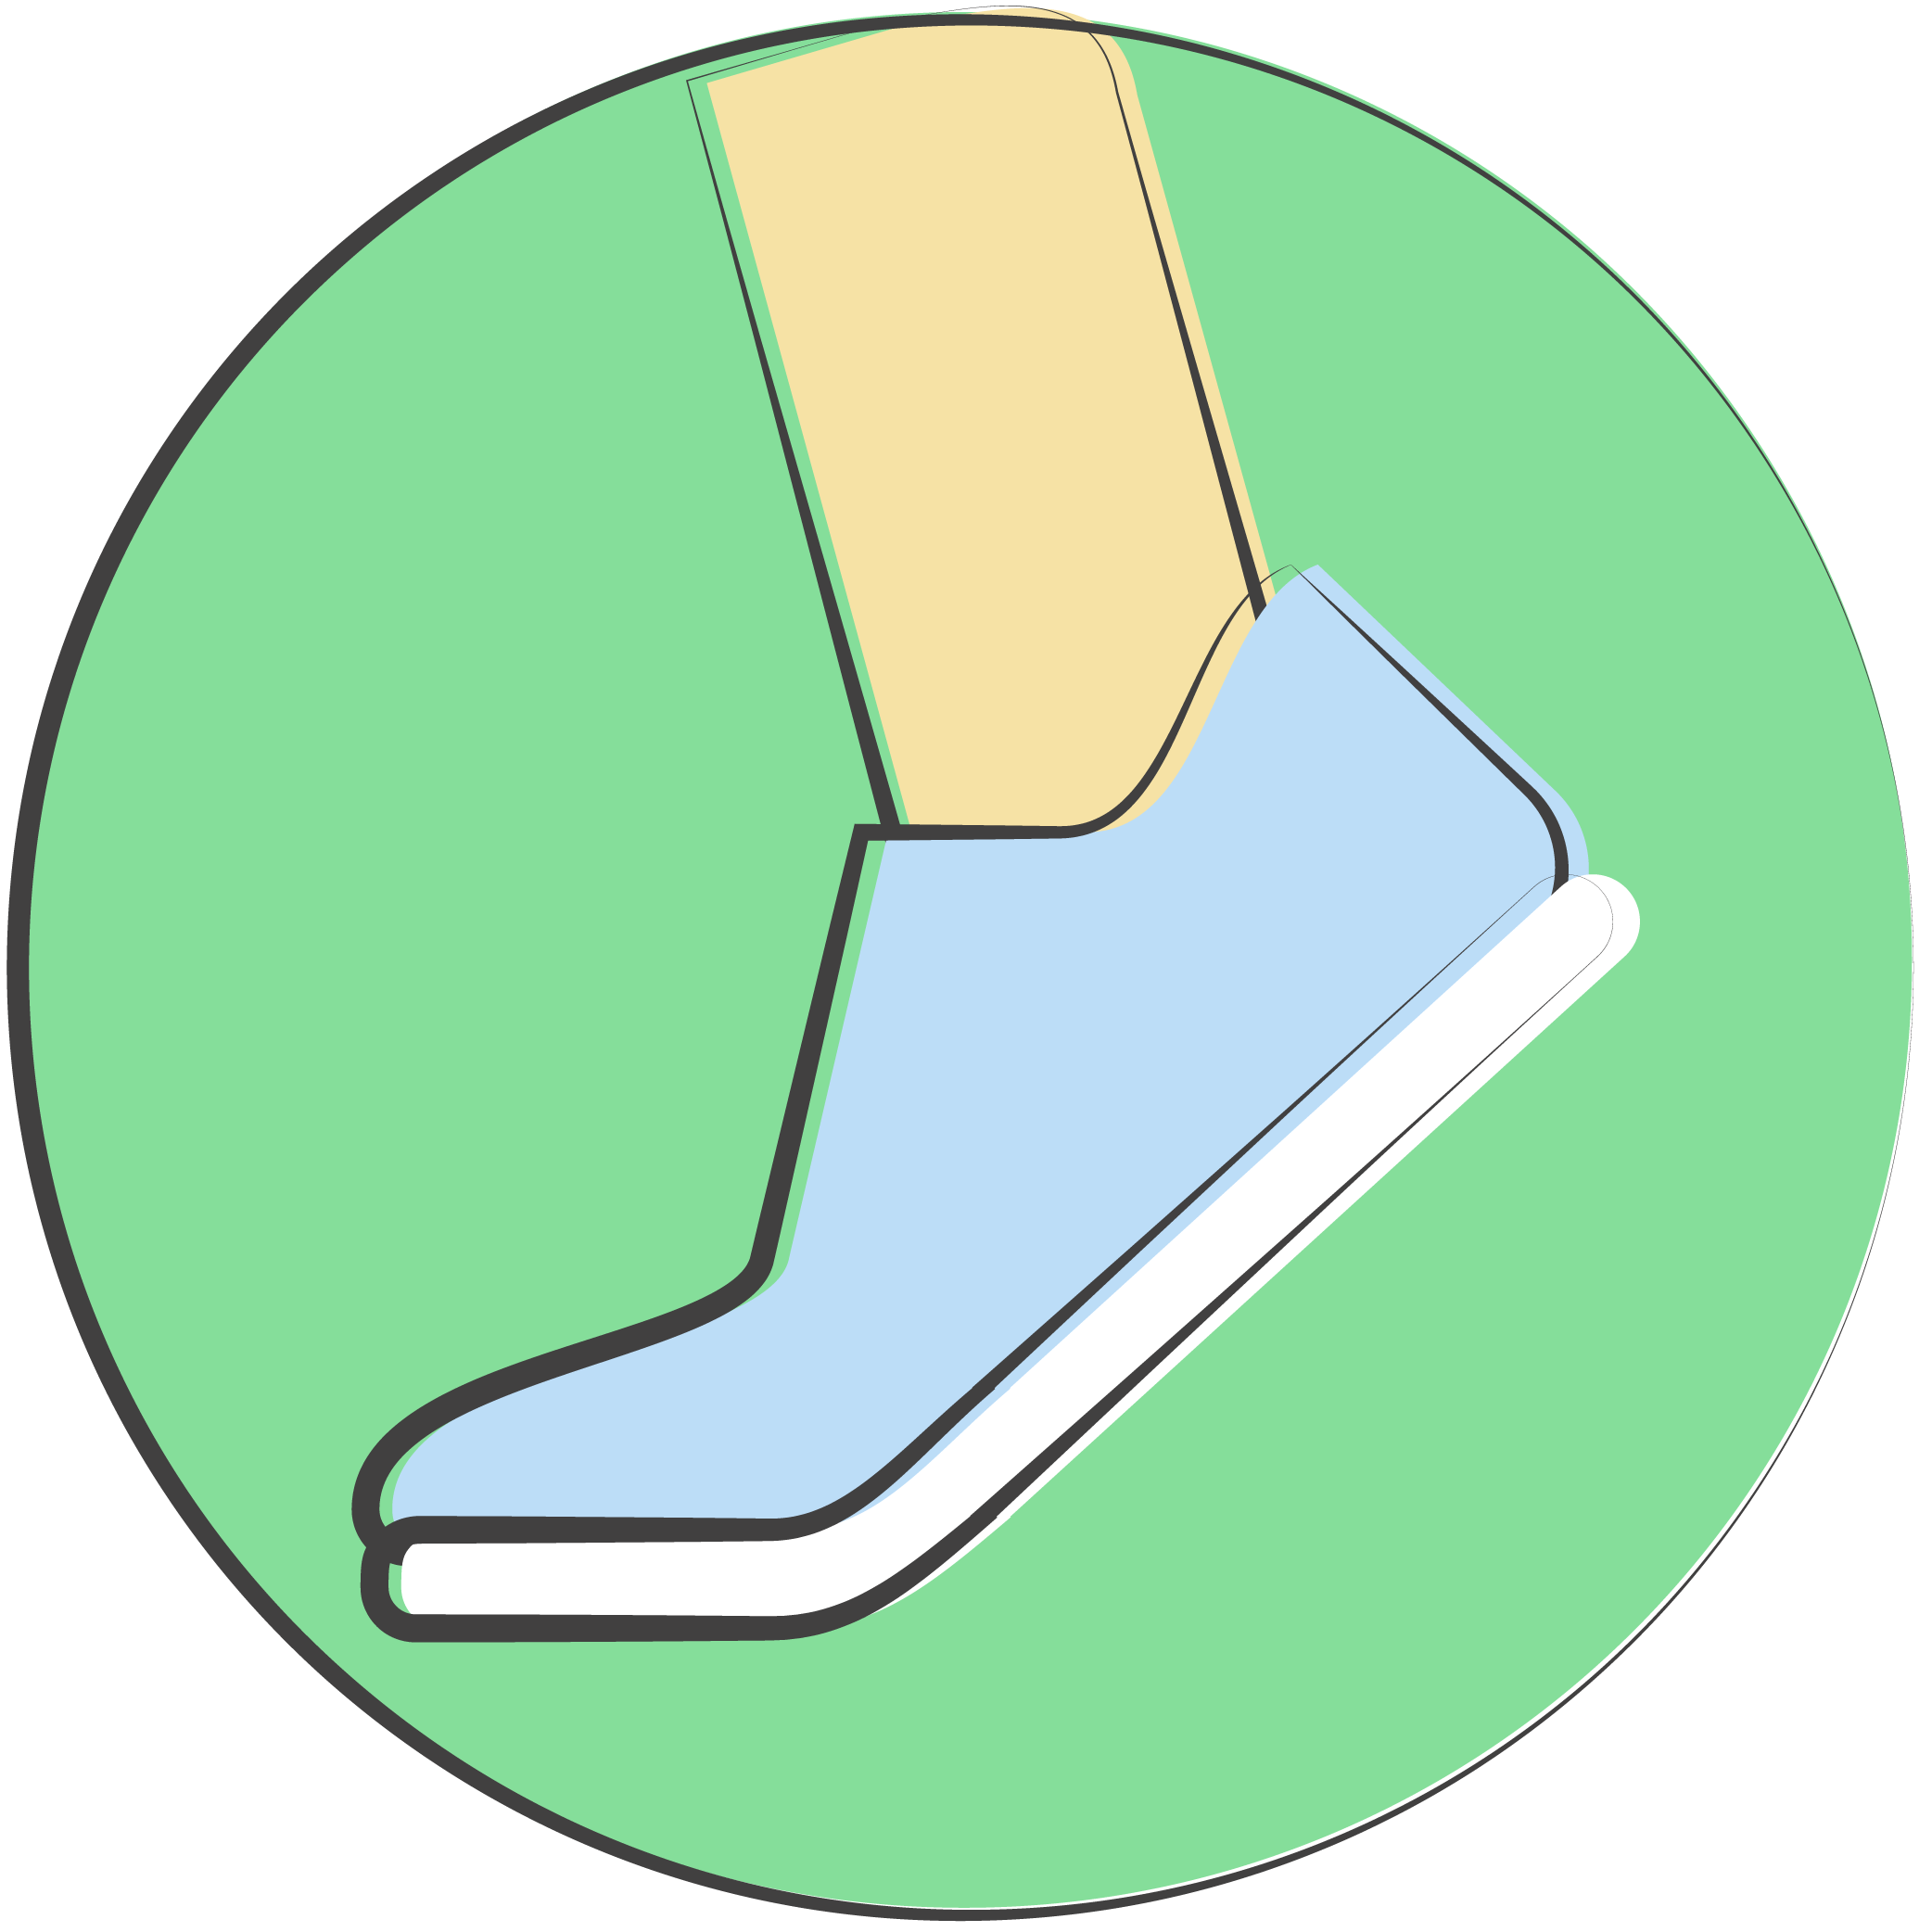 Illustration of a foot in motion.